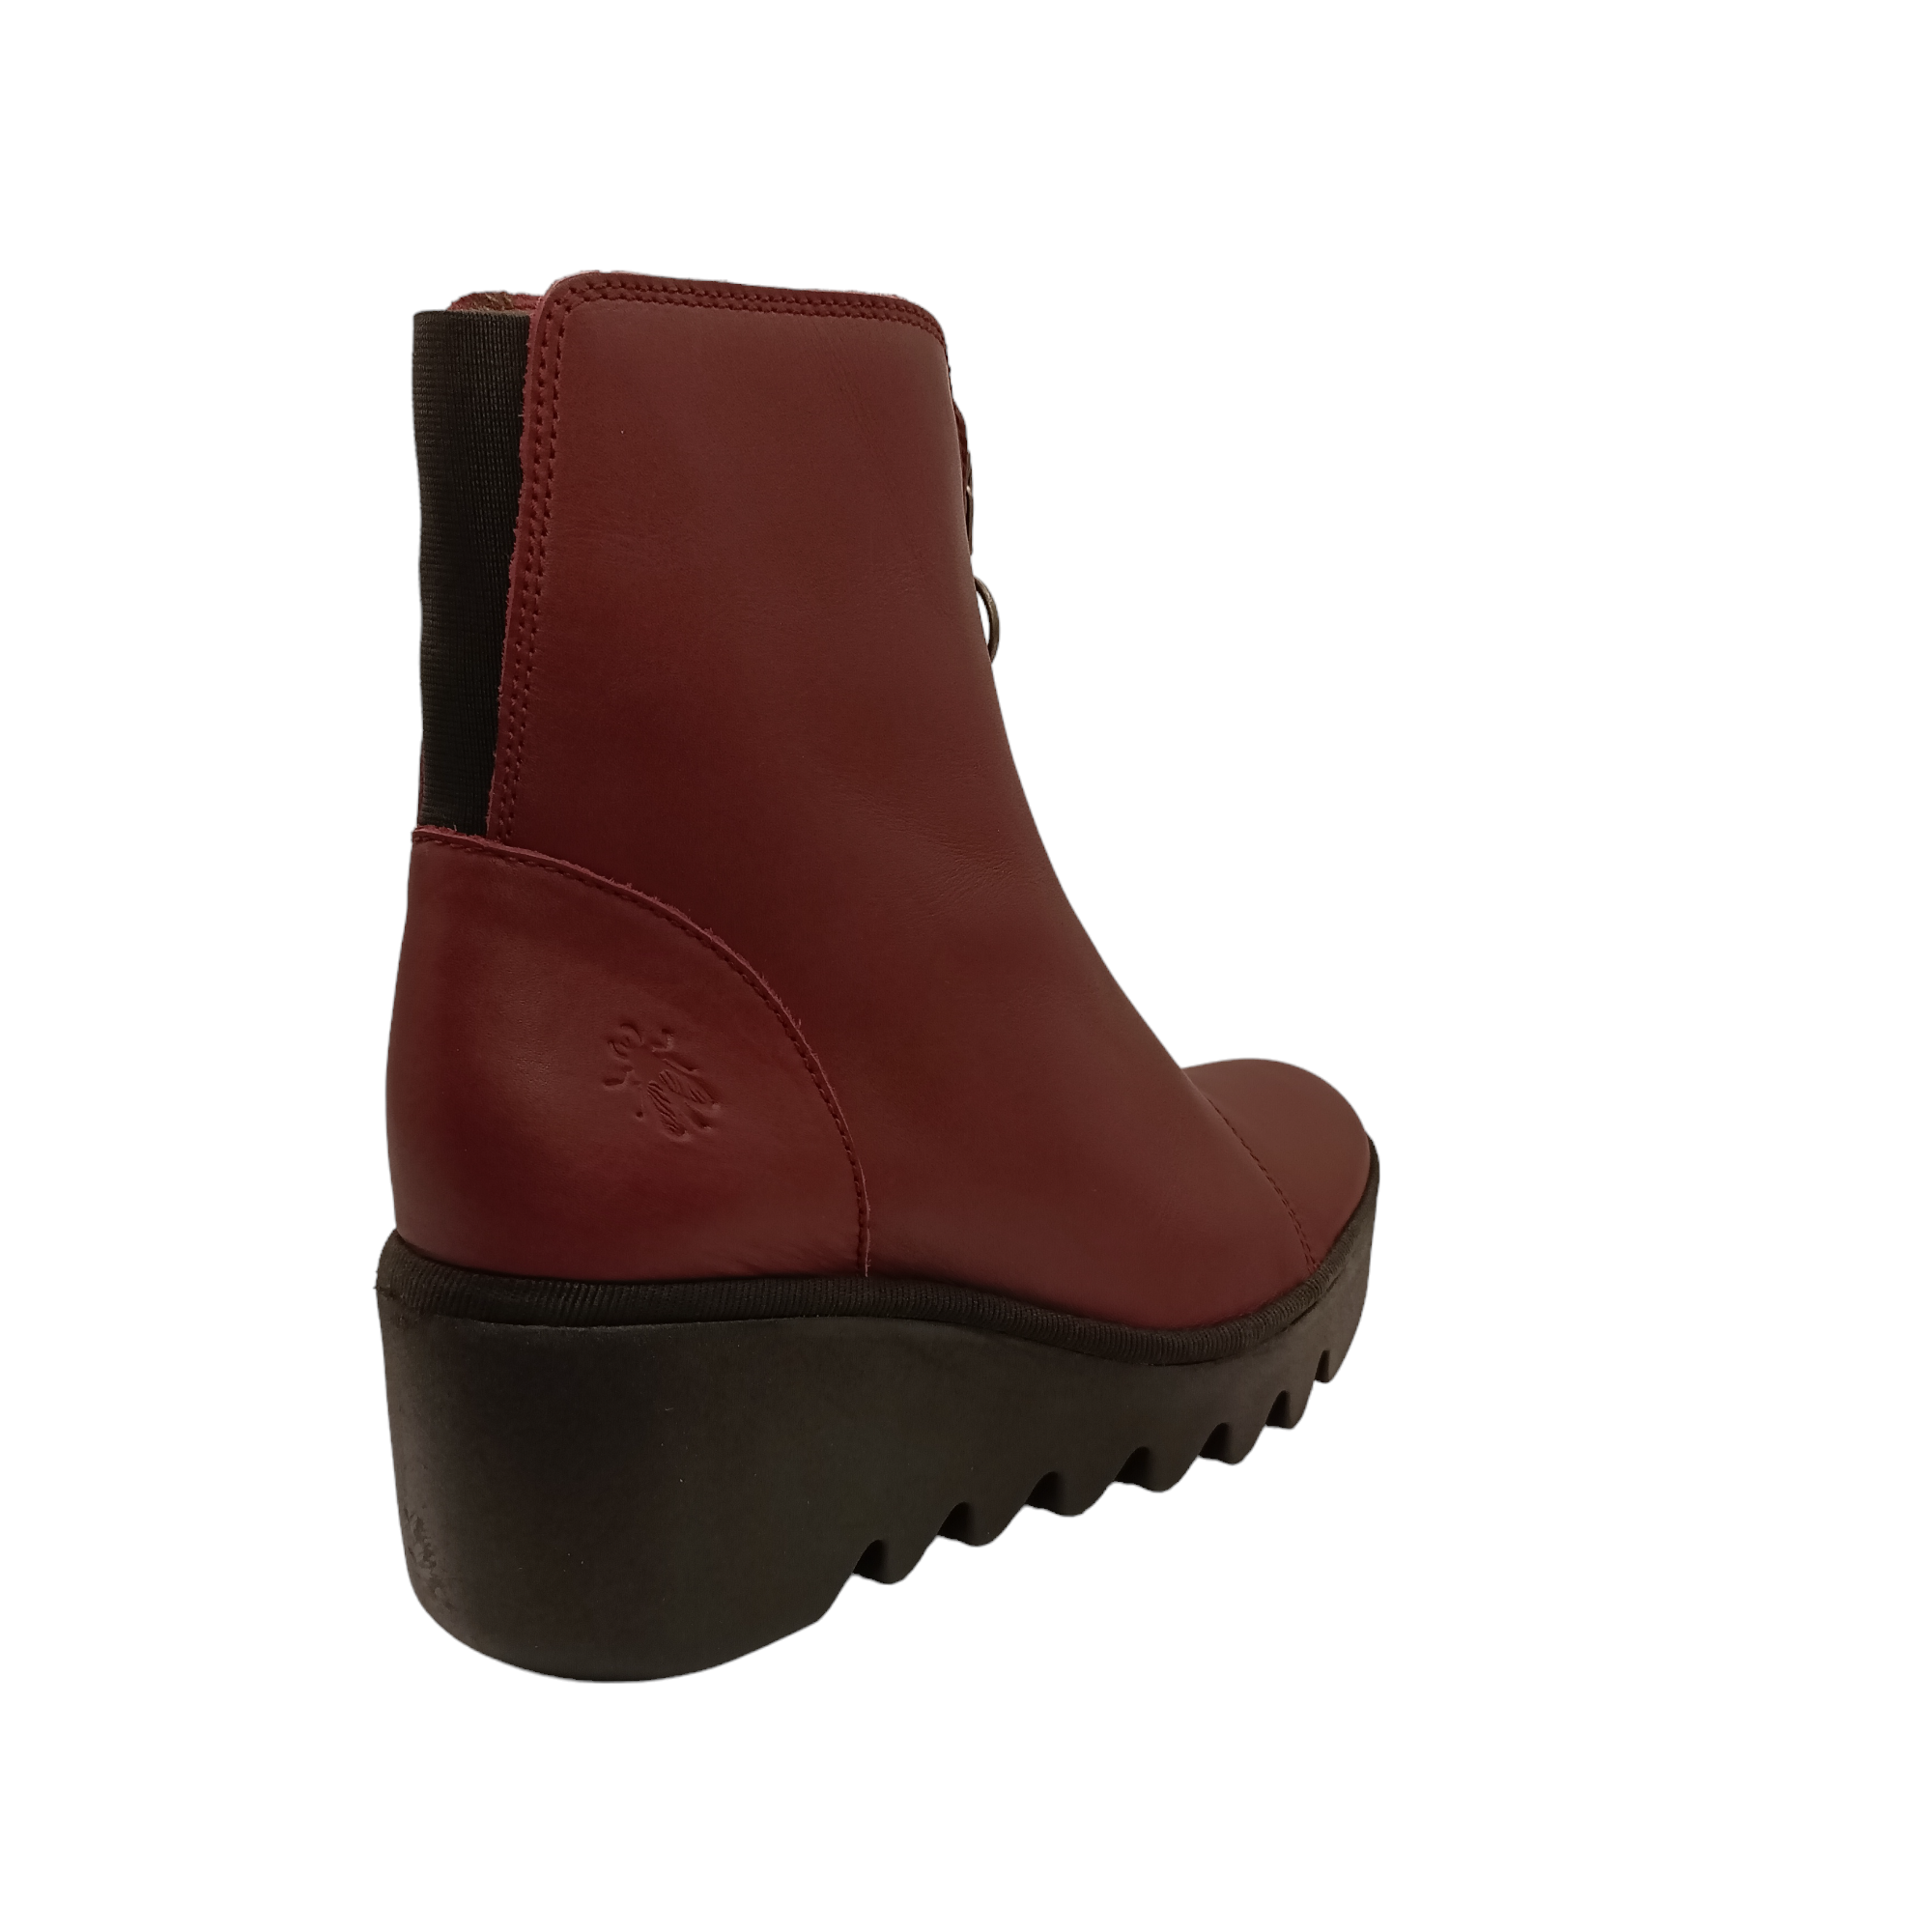 Shop Boce Fly London - with shoe&me - from Fly London - Boots - Boot, Winter, Womens - [collection]